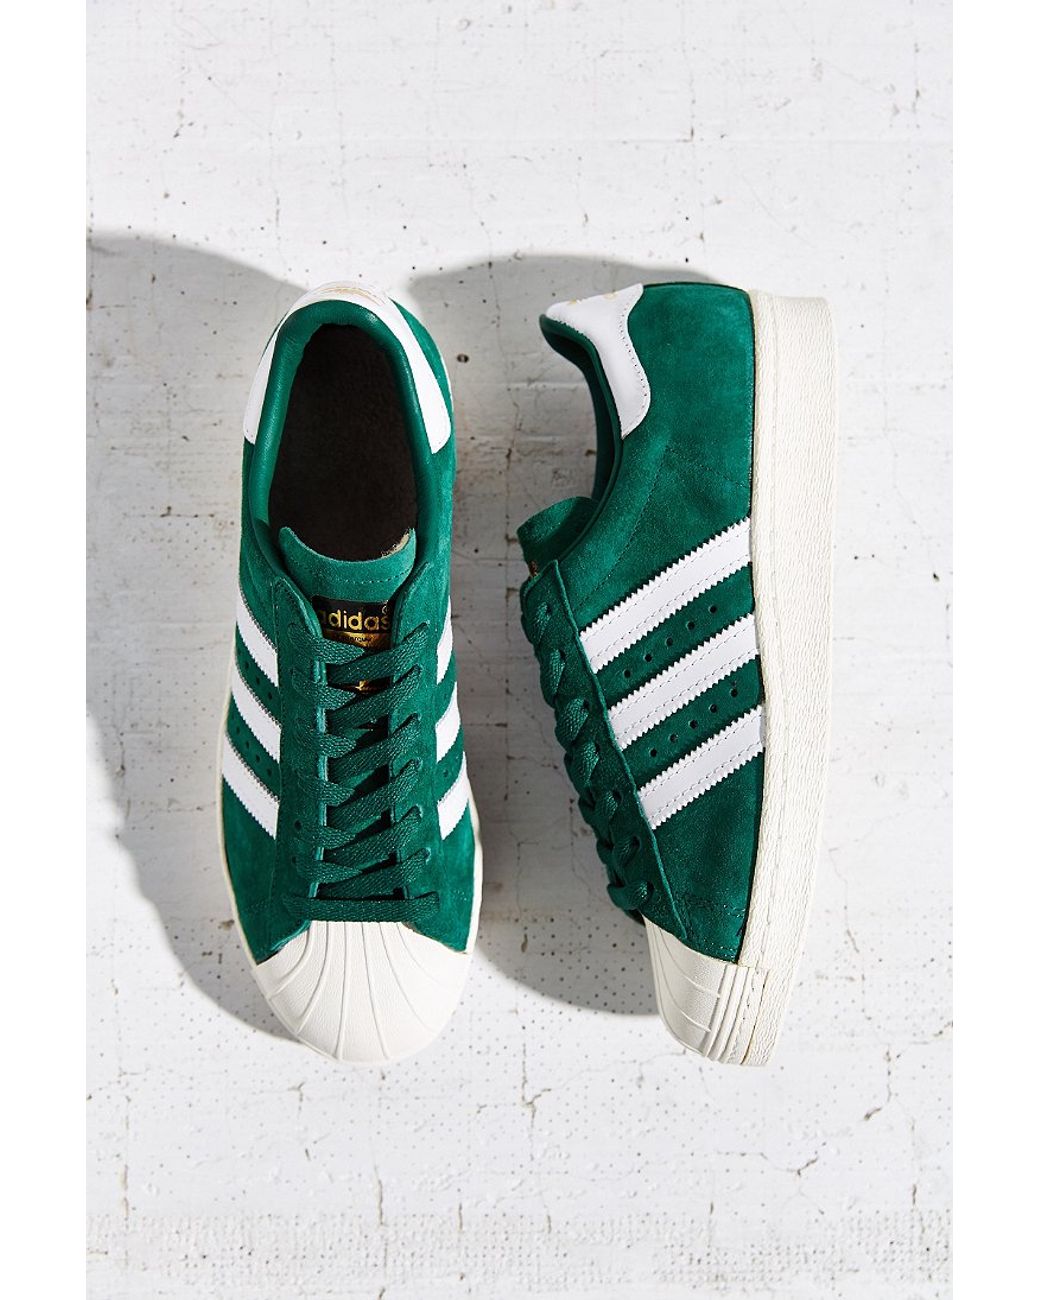 Adidas Superstar 80s Trainers White/Green